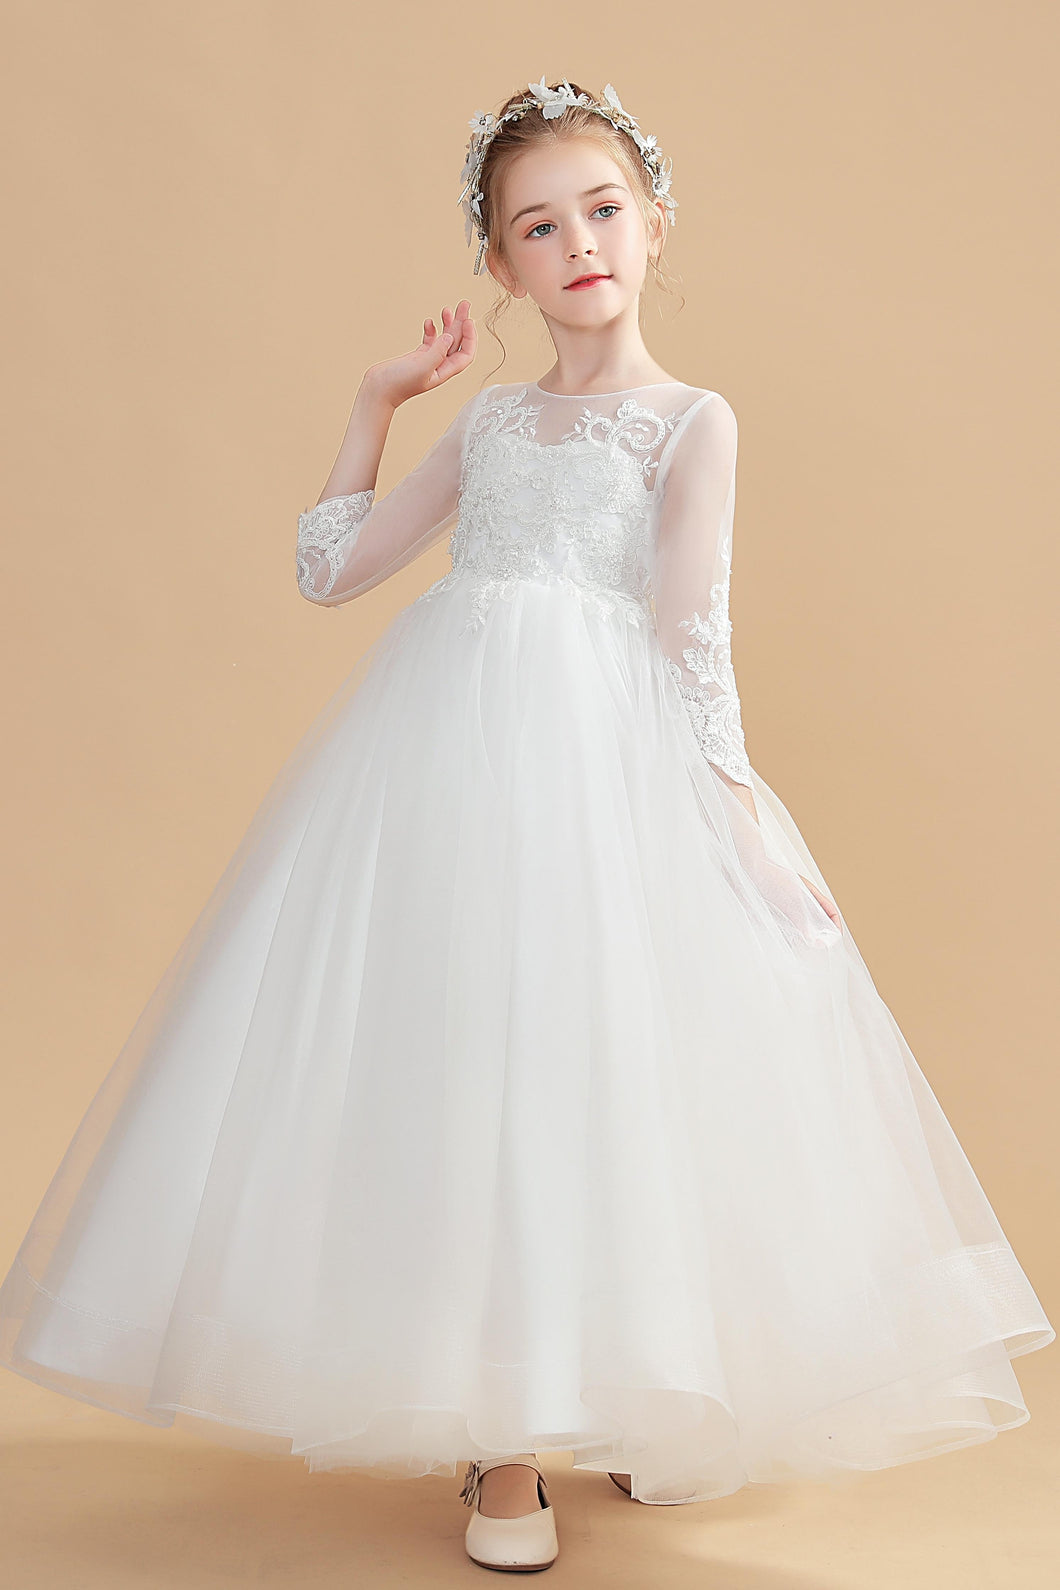 Elegant Ivory Long Sleeves Tulle Flower Girl dress With Lace